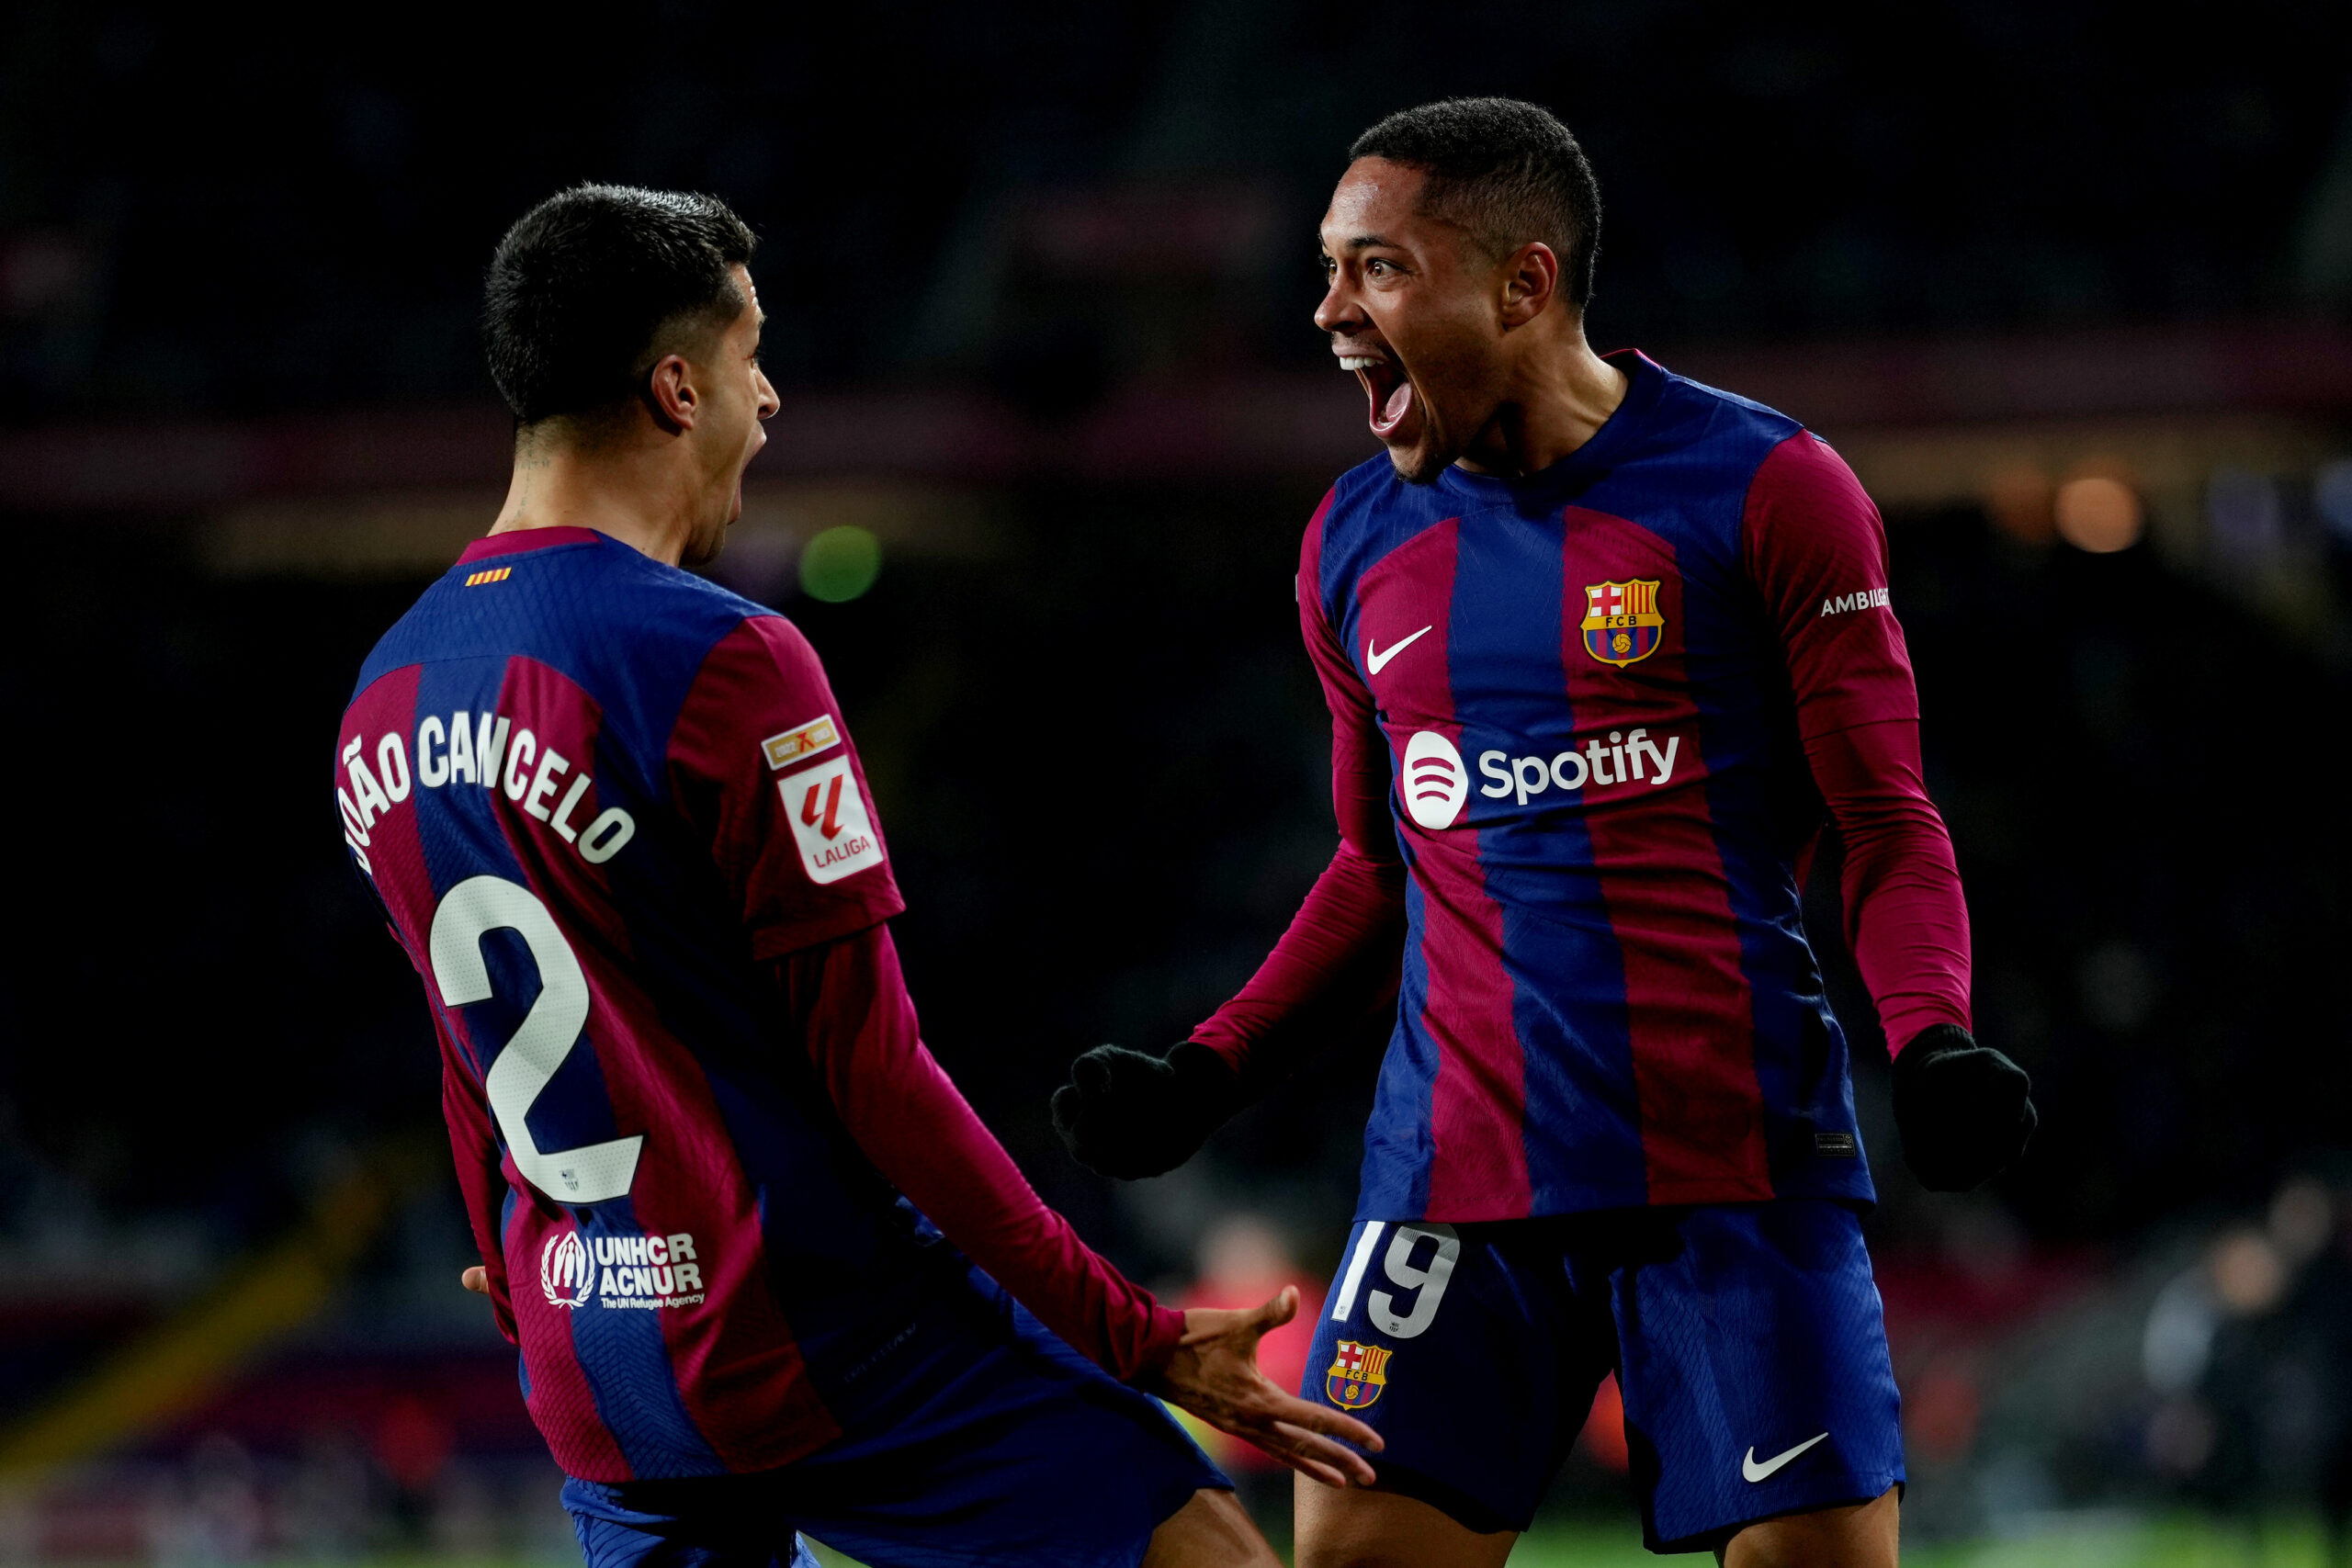 BARCELONA, SPAIN - JANUARY 31: Vitor Roque of FC Barcelona celebrates scoring his team's first goal with teammate Joao Cancelo during the LaLiga EA Sports match between FC Barcelona and CA Osasuna at Estadi Olimpic Lluis Companys on January 31, 2024 in Barcelona, Spain.